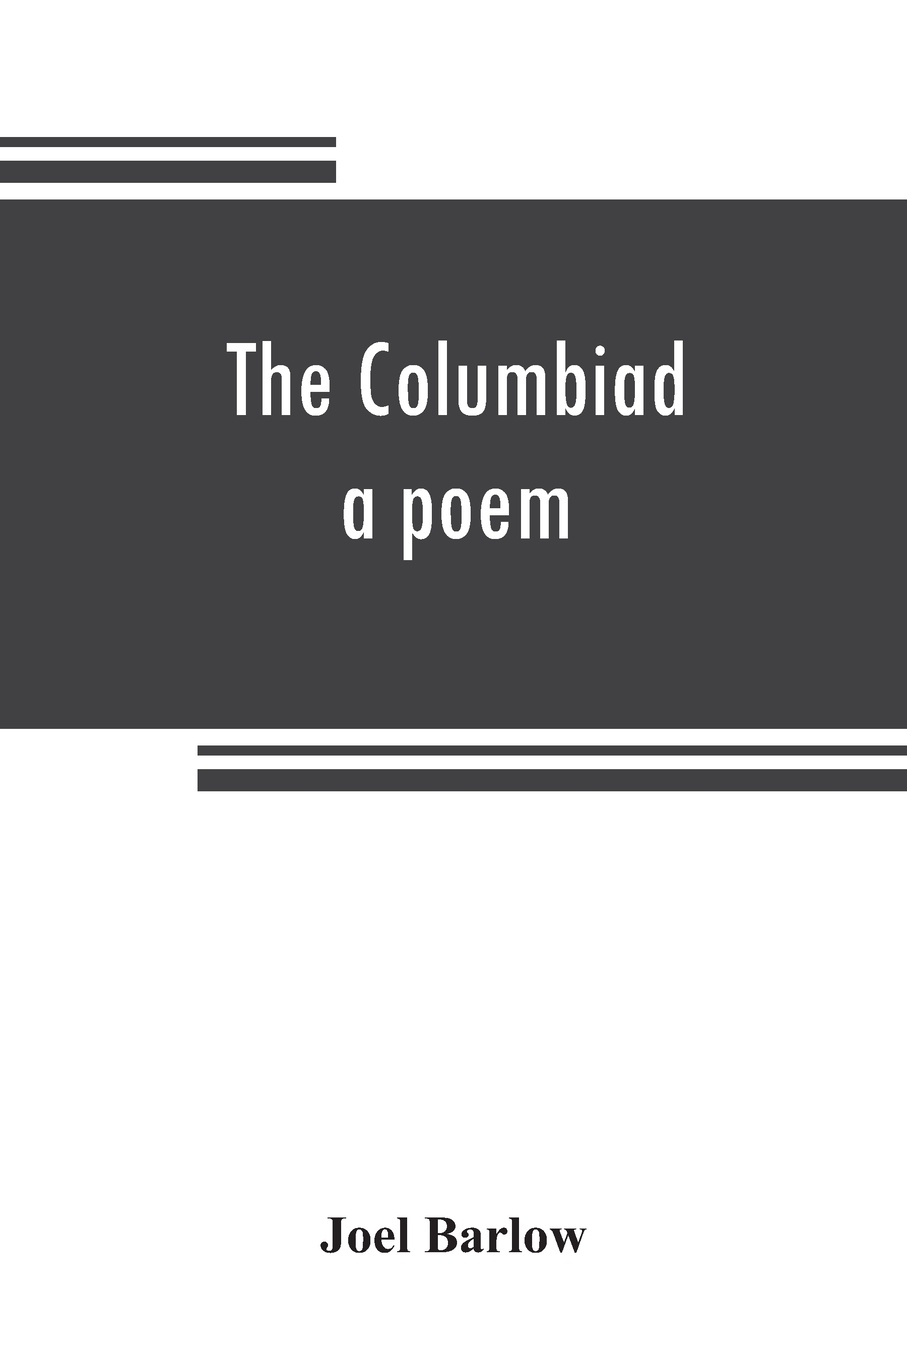 The Columbiad a poem